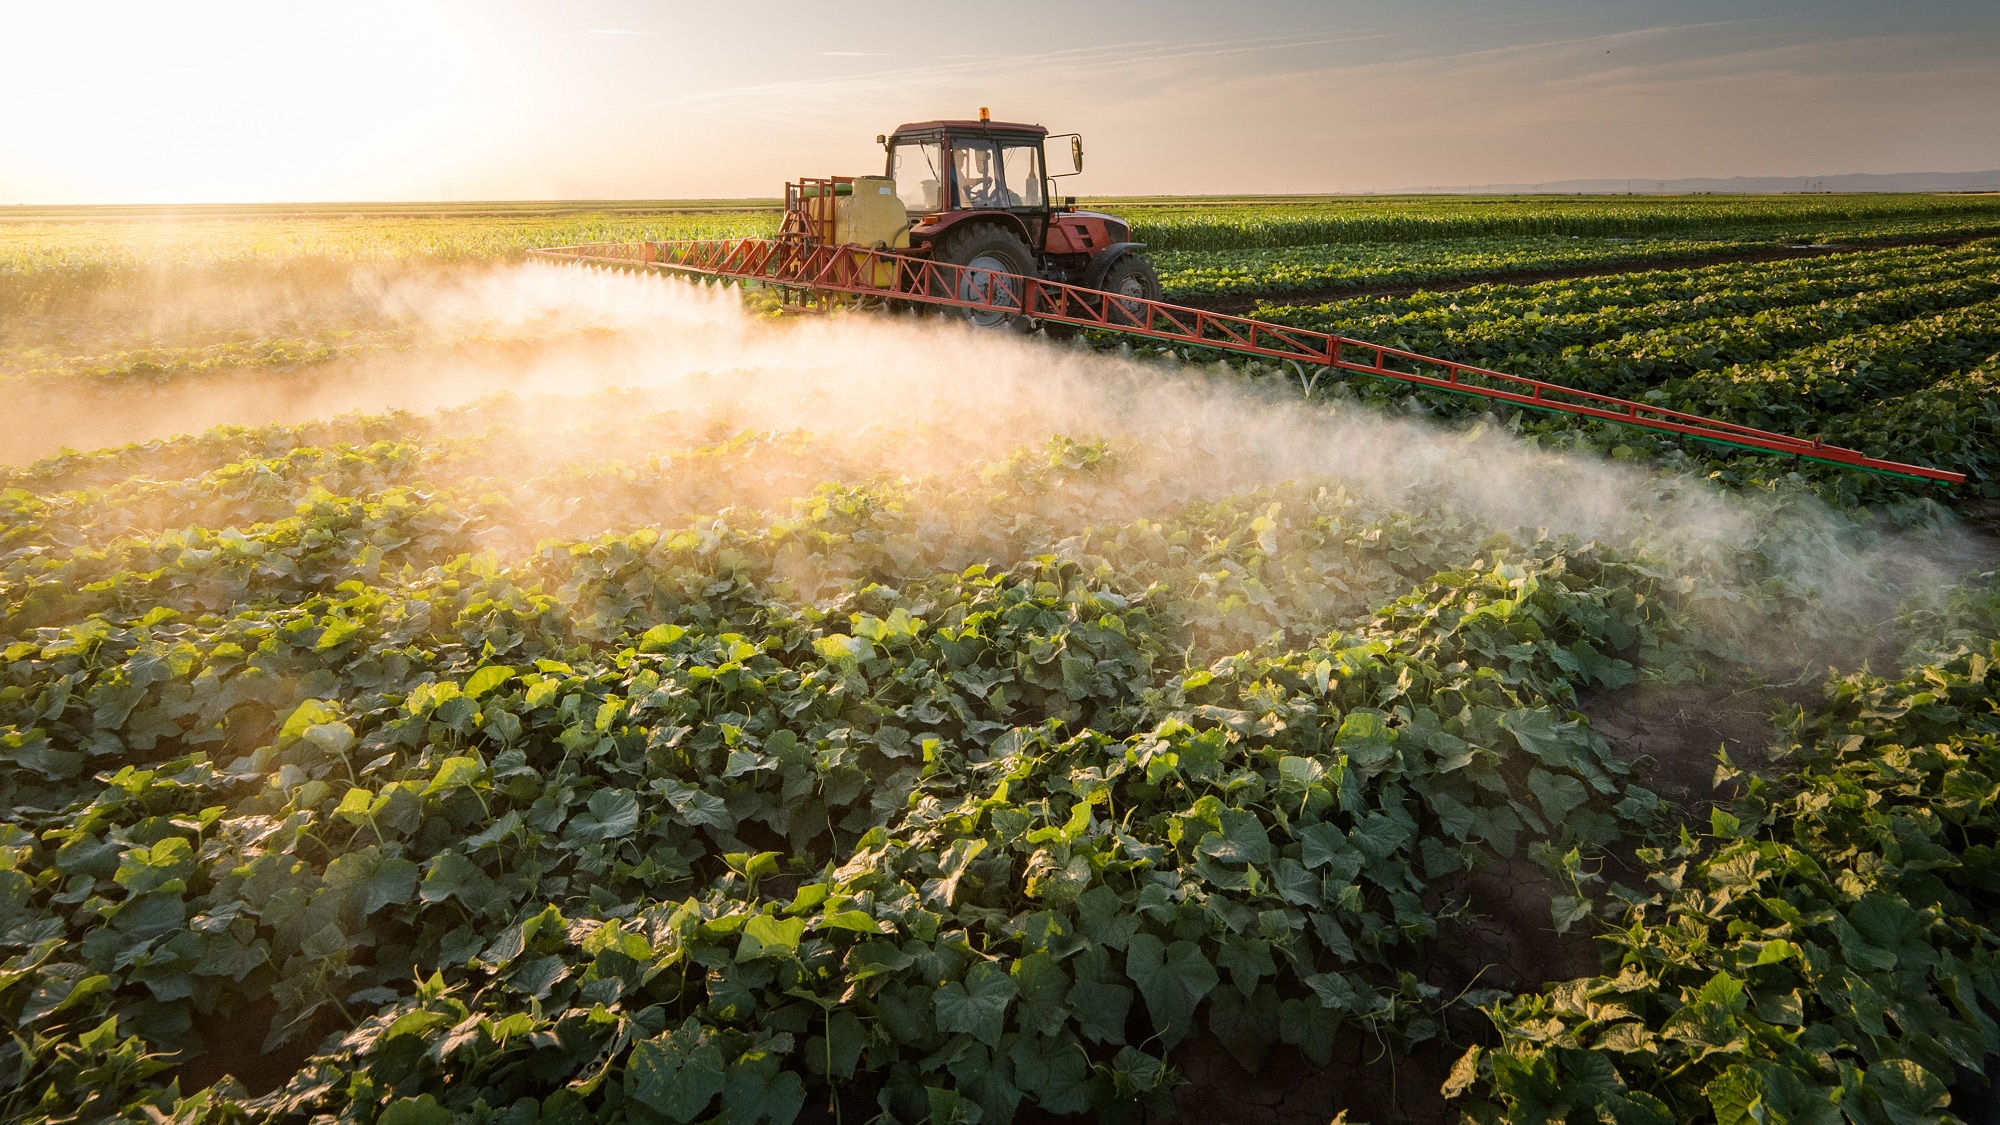 Too much exposure to pesticides can increase risk of death